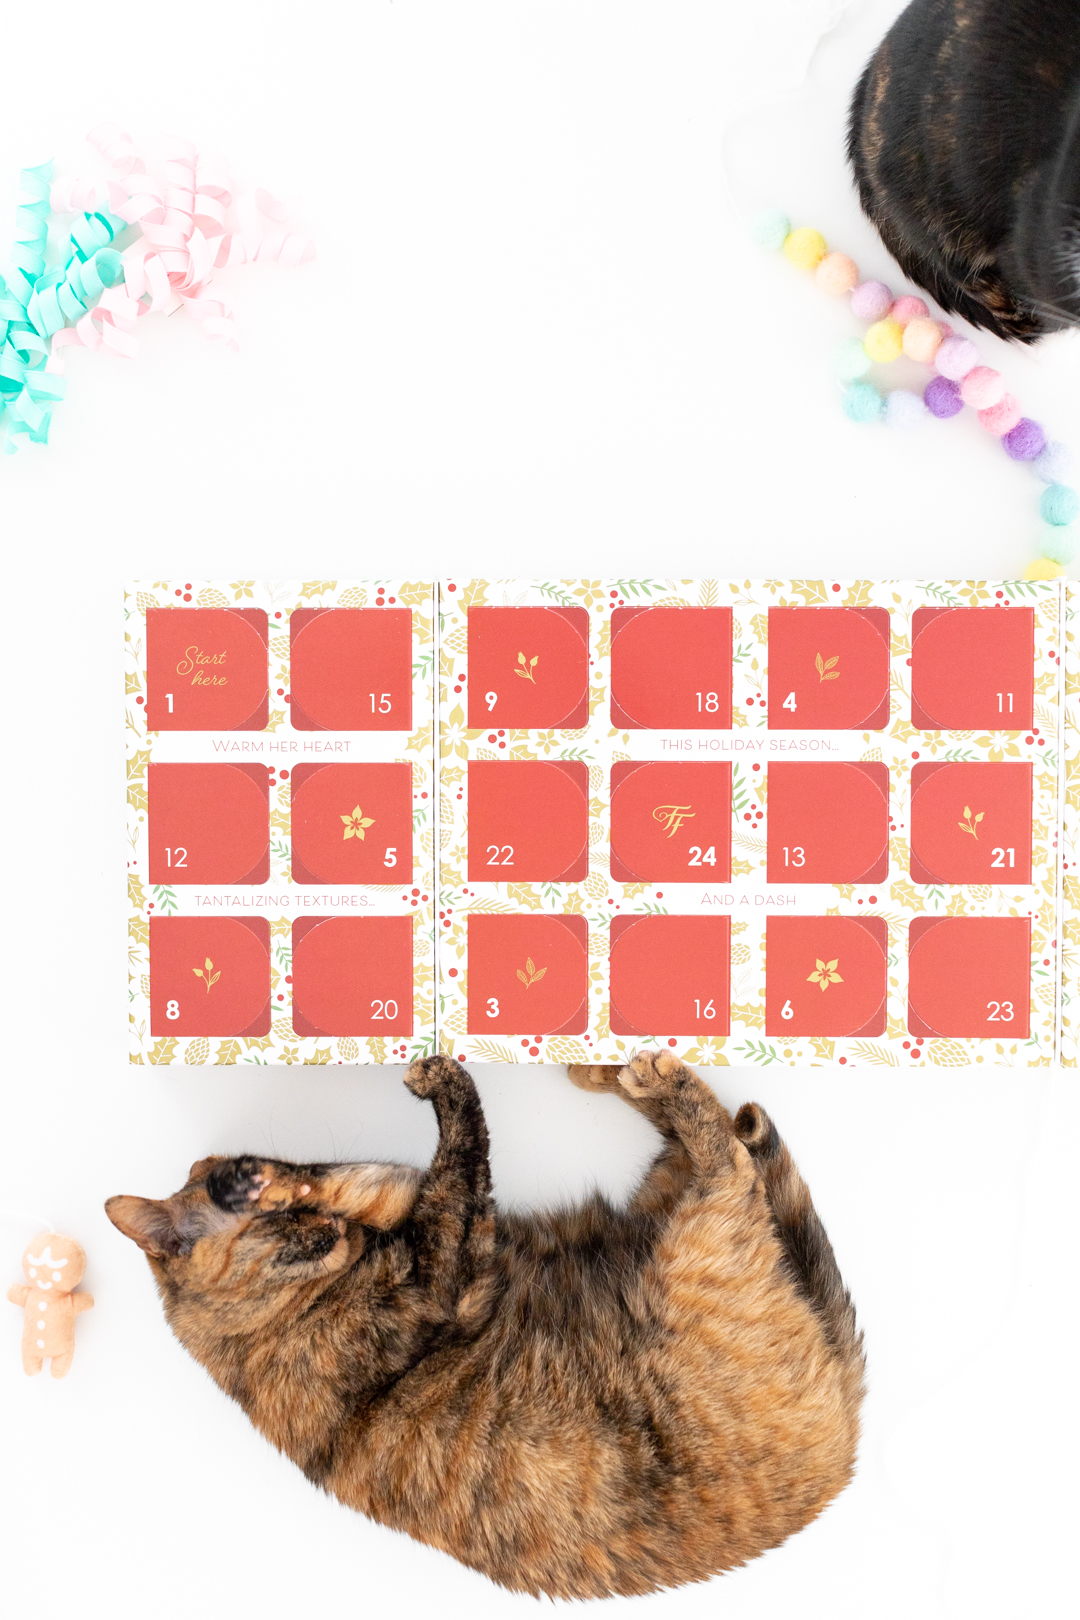 cat laying next to a cat advent calendar for christmas